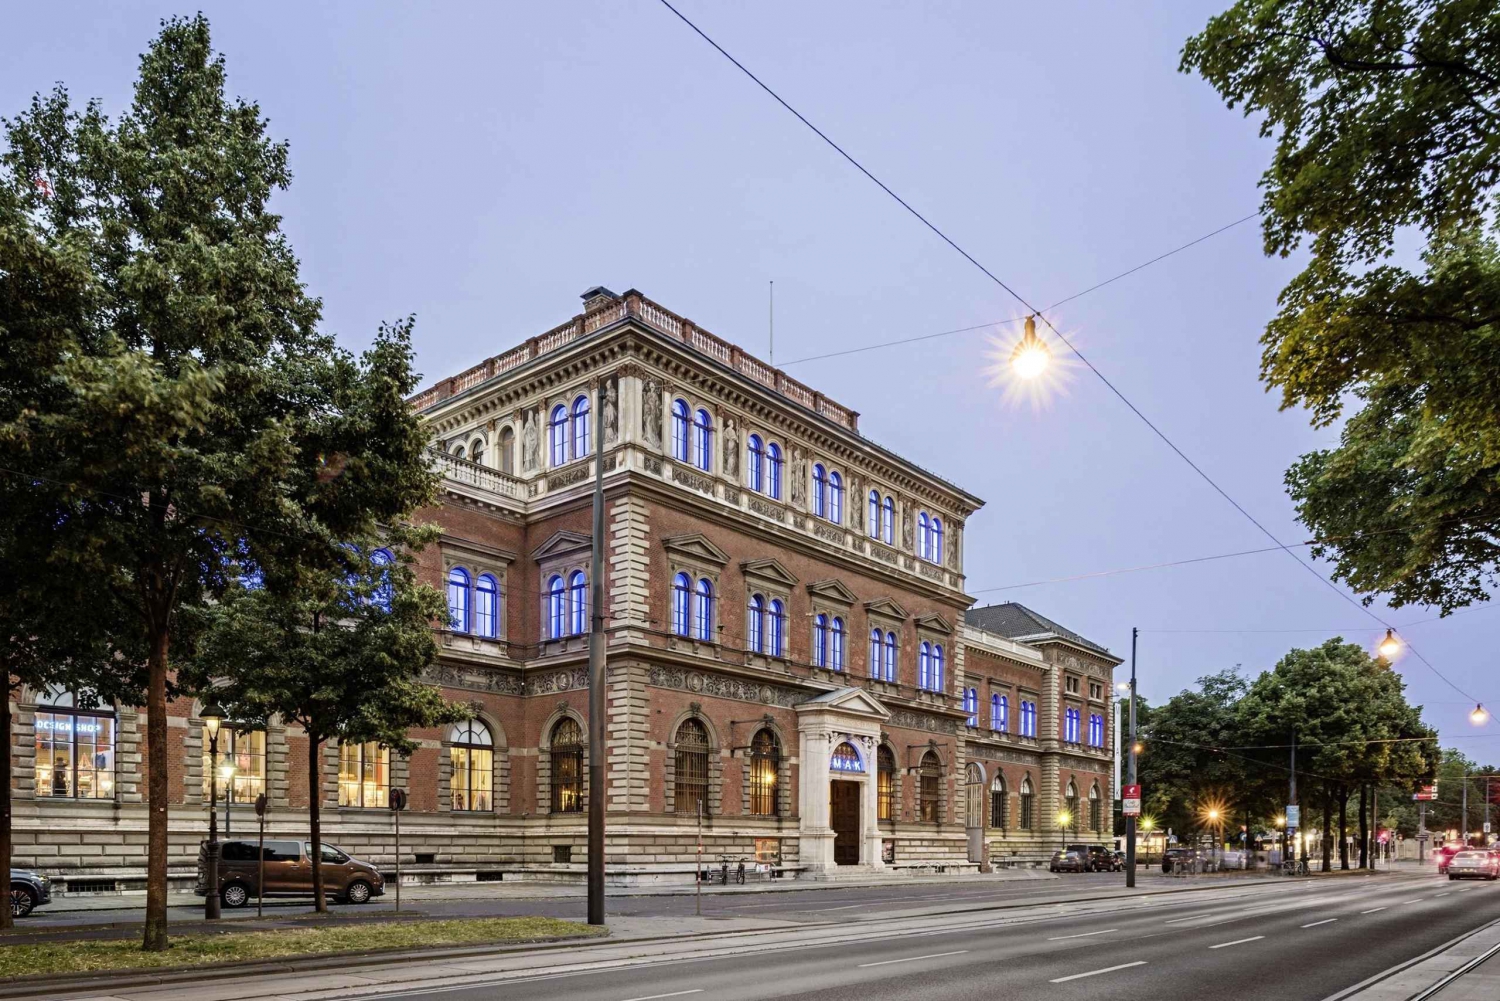 Vienna: Ticket for the MAK - Museum of Applied Arts